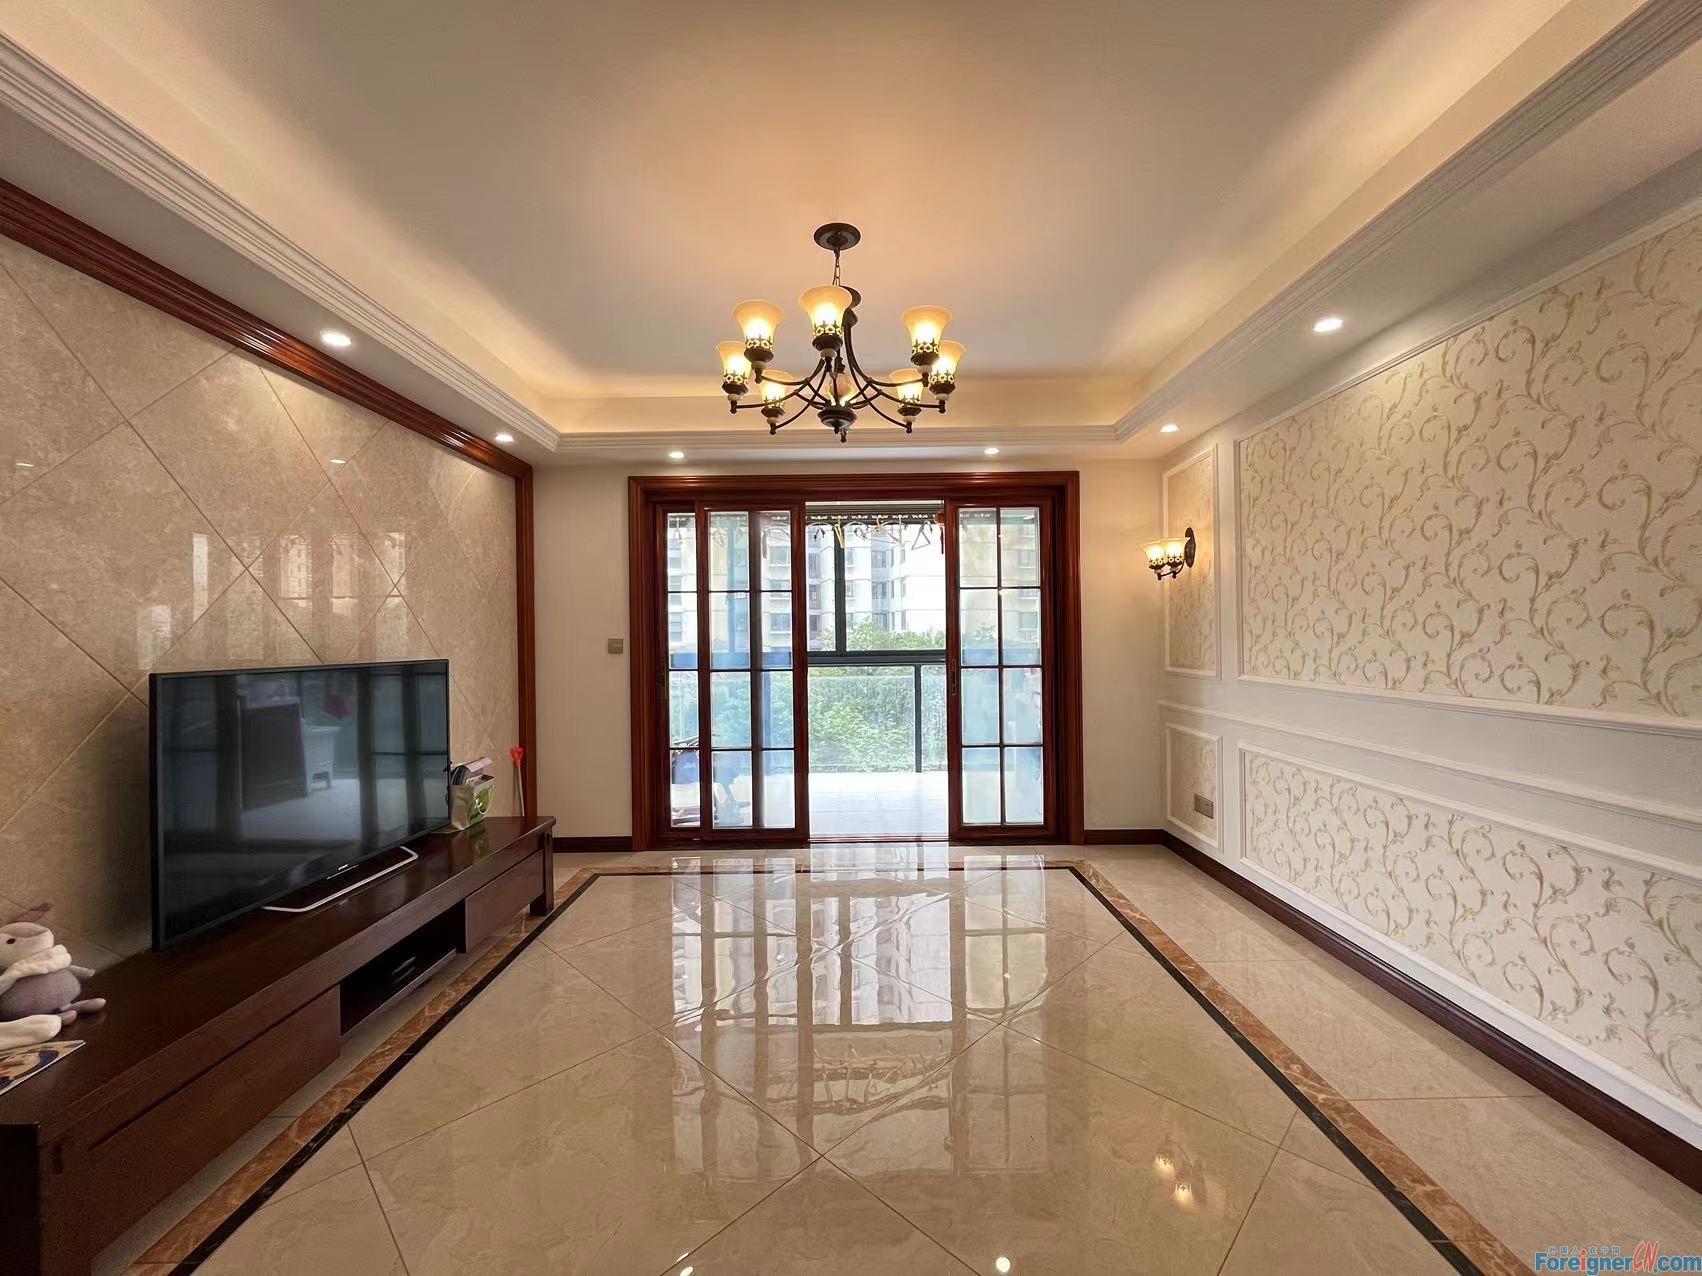 Amazing！！Lake view house to rent for expats Suzhou/3 bedrooms and 2 bathrooms/Floor heating,bathtub,Fully-furnished/Suzhou Victoria Kindergarten / Suzhou Culture & Expo Shopping Center